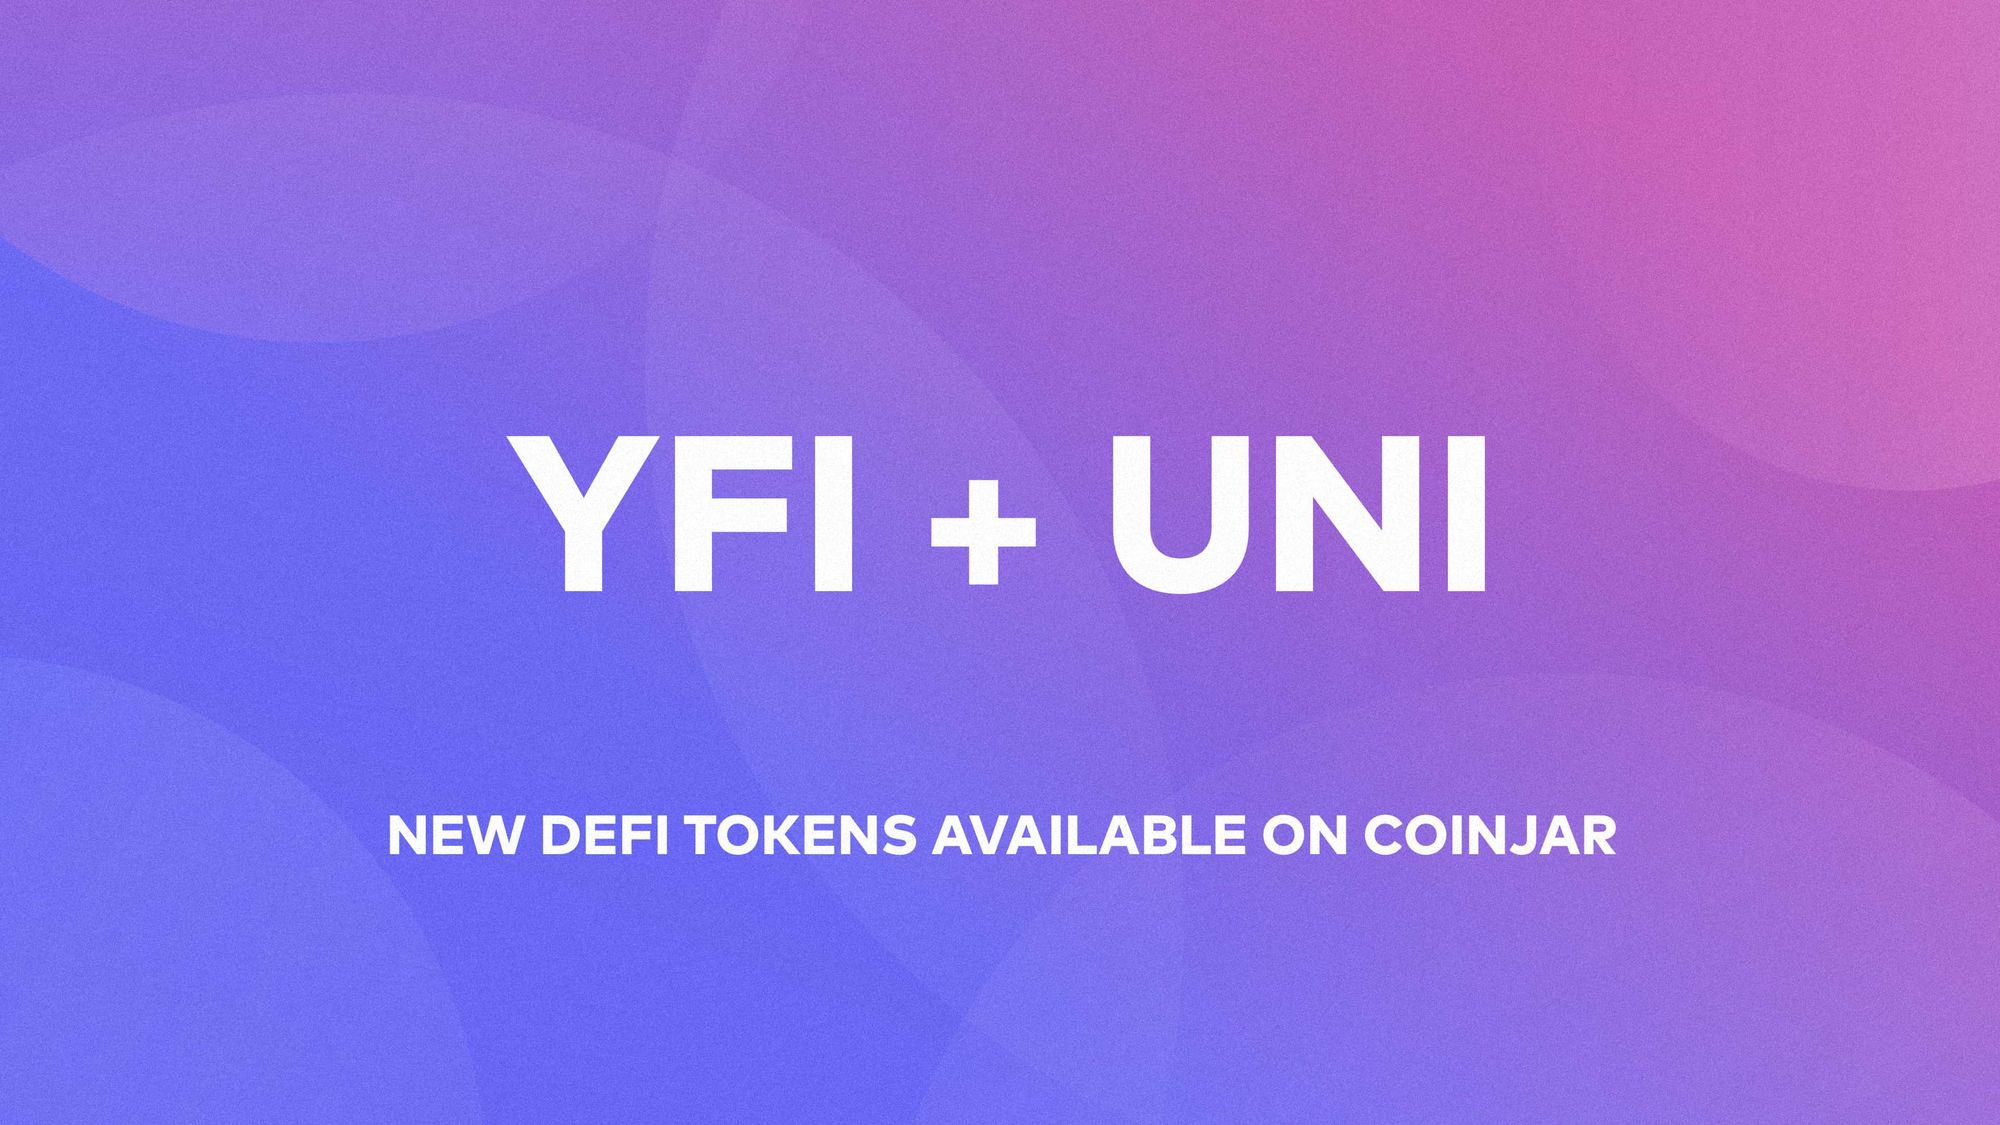 YFI and UNI are now available for trading on CoinJar!